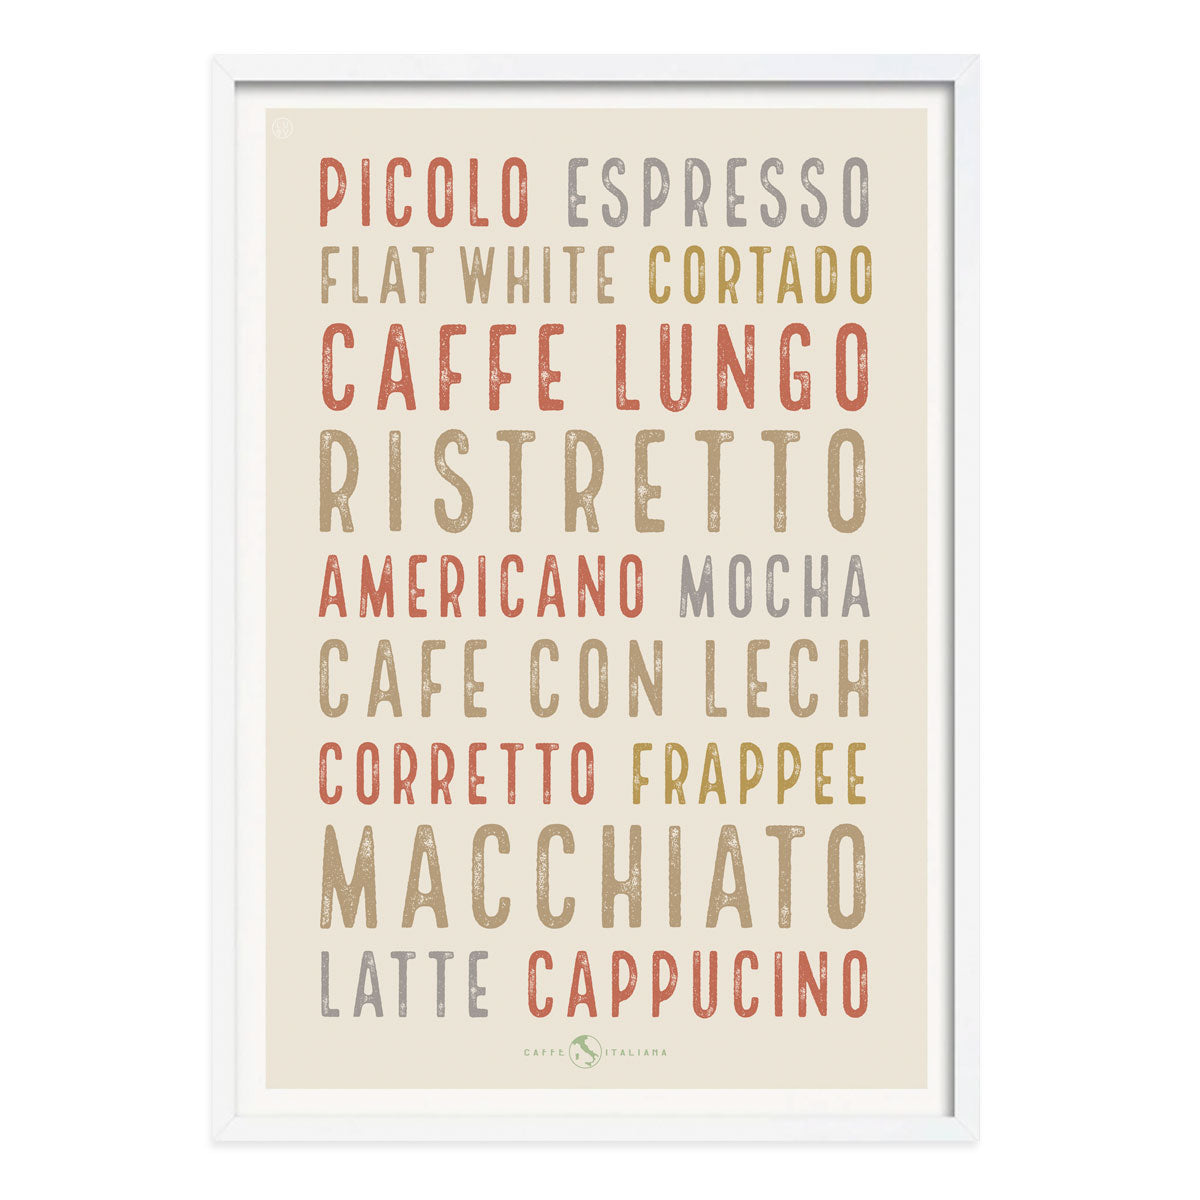 Retro vintage light Italian Coffee poster print in white frame from Places We Luv